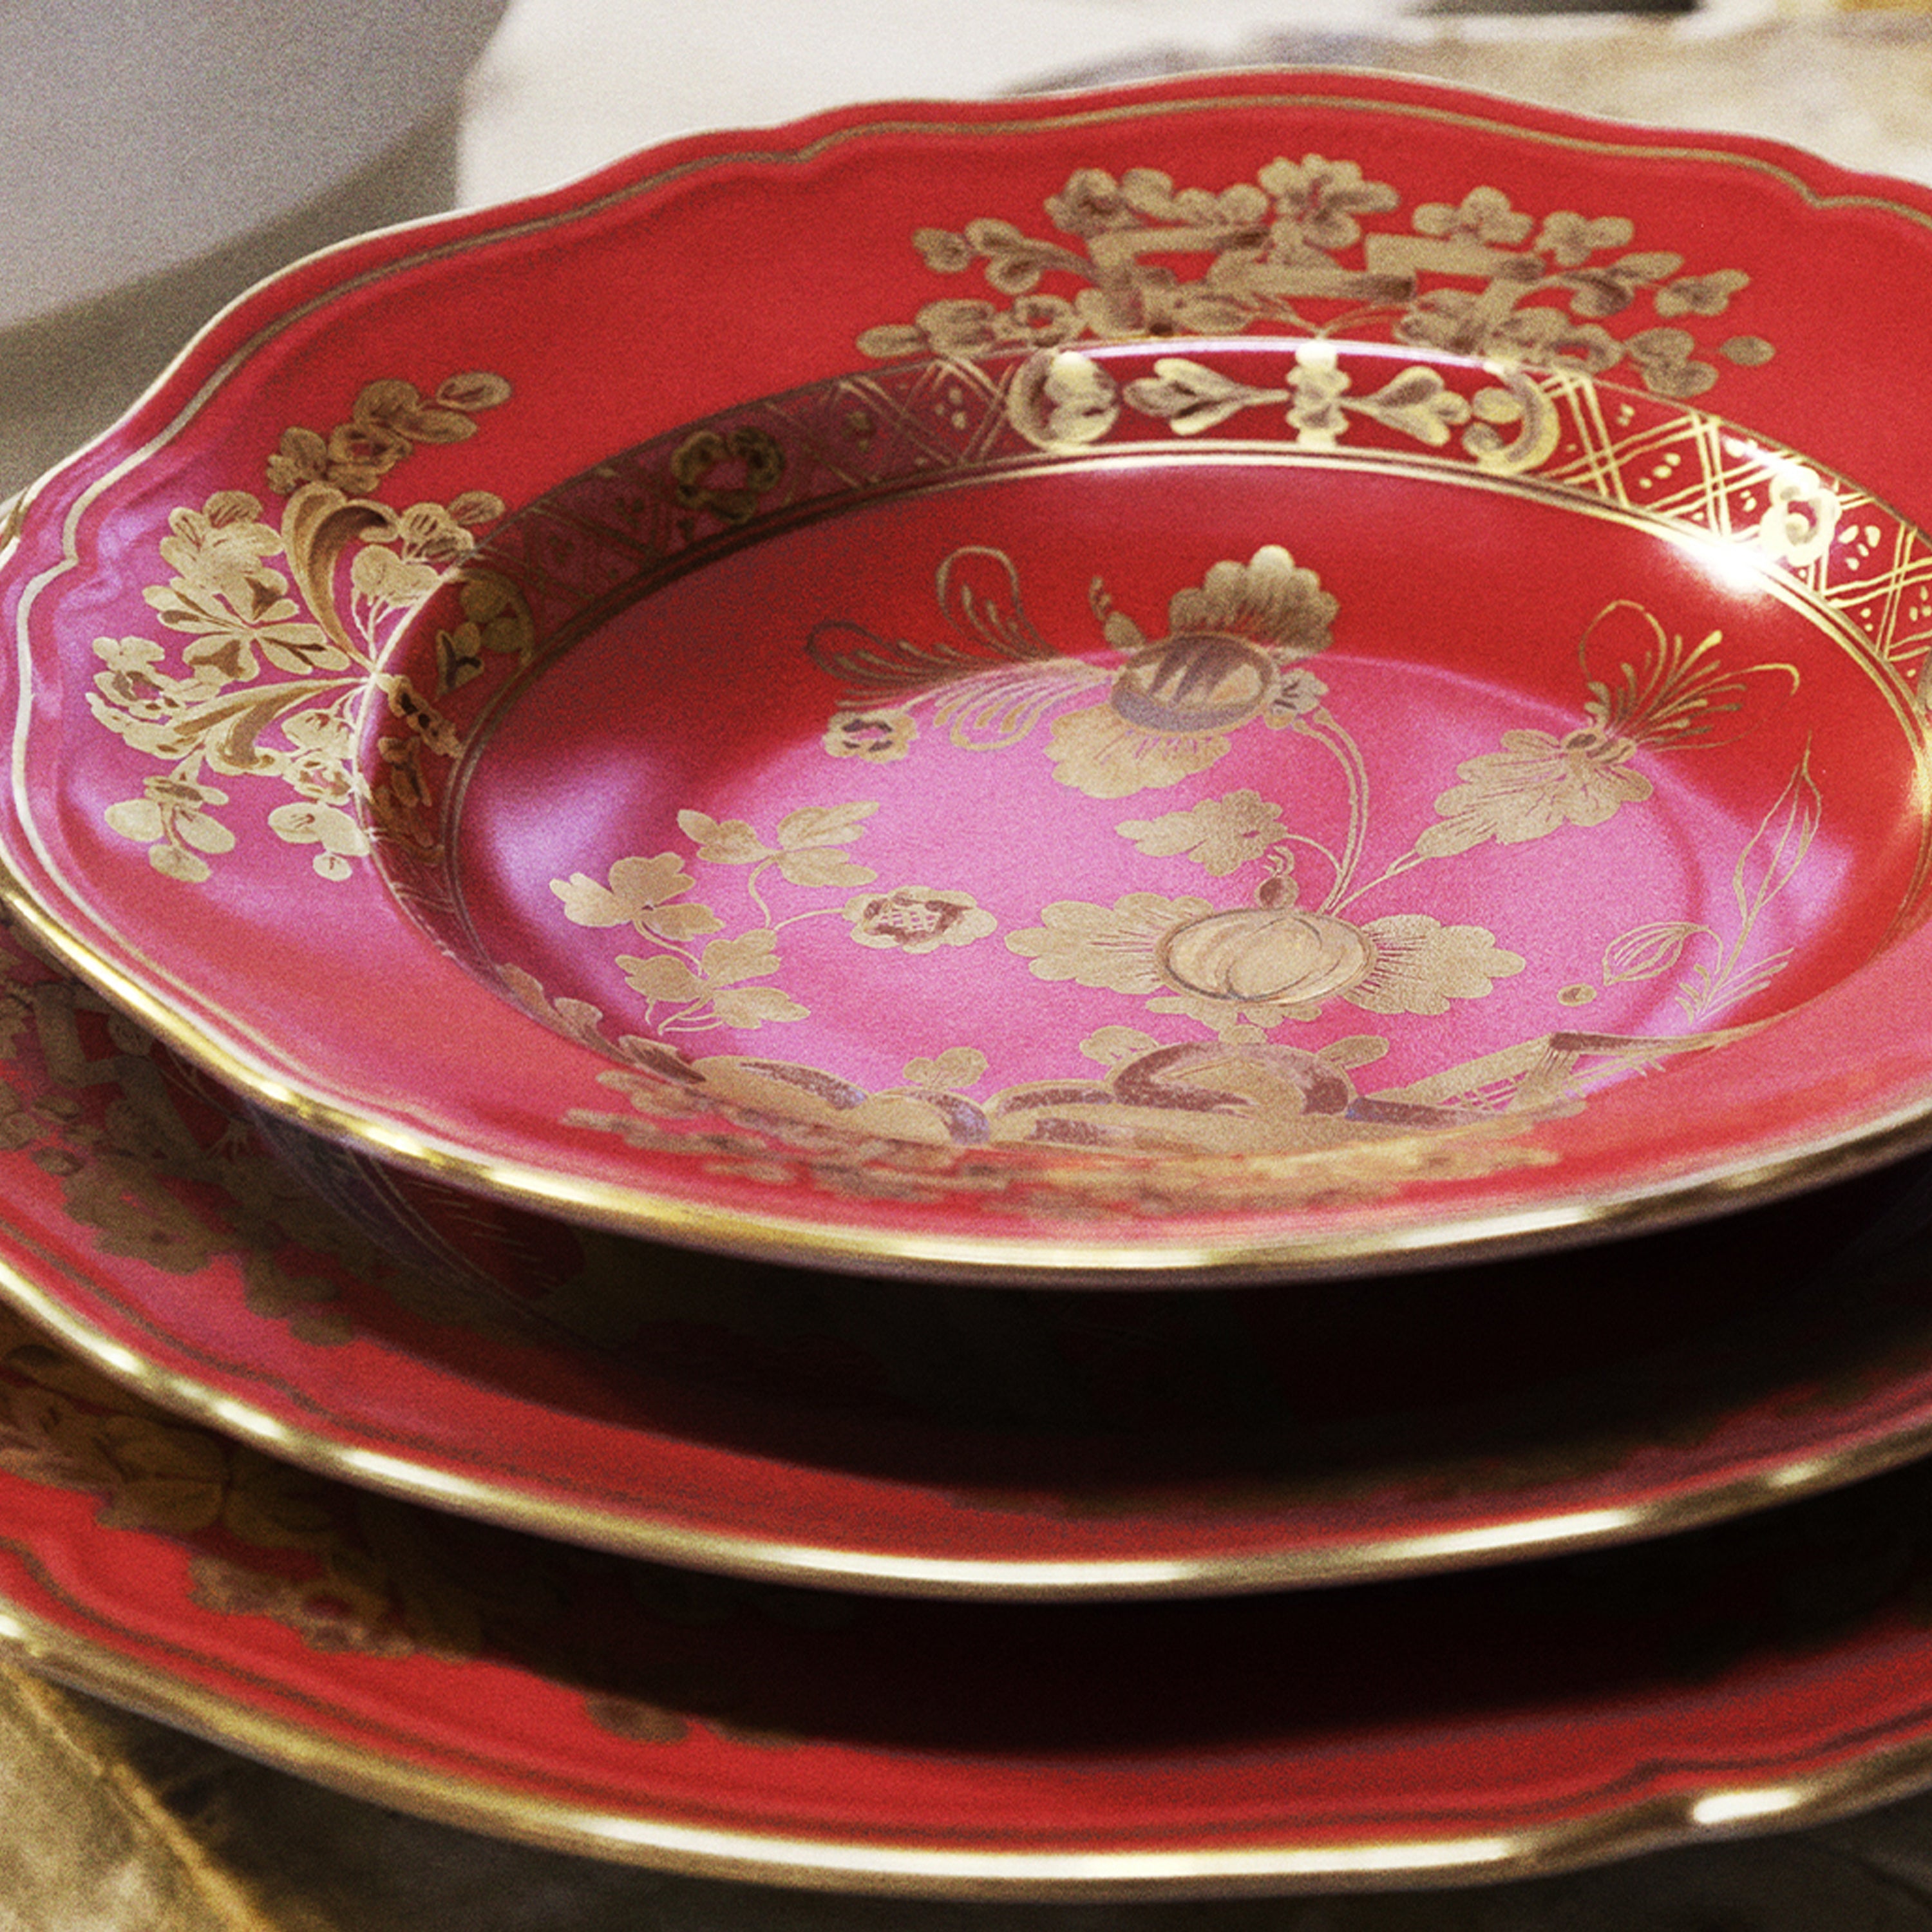 Oriente Gold Charger Plate